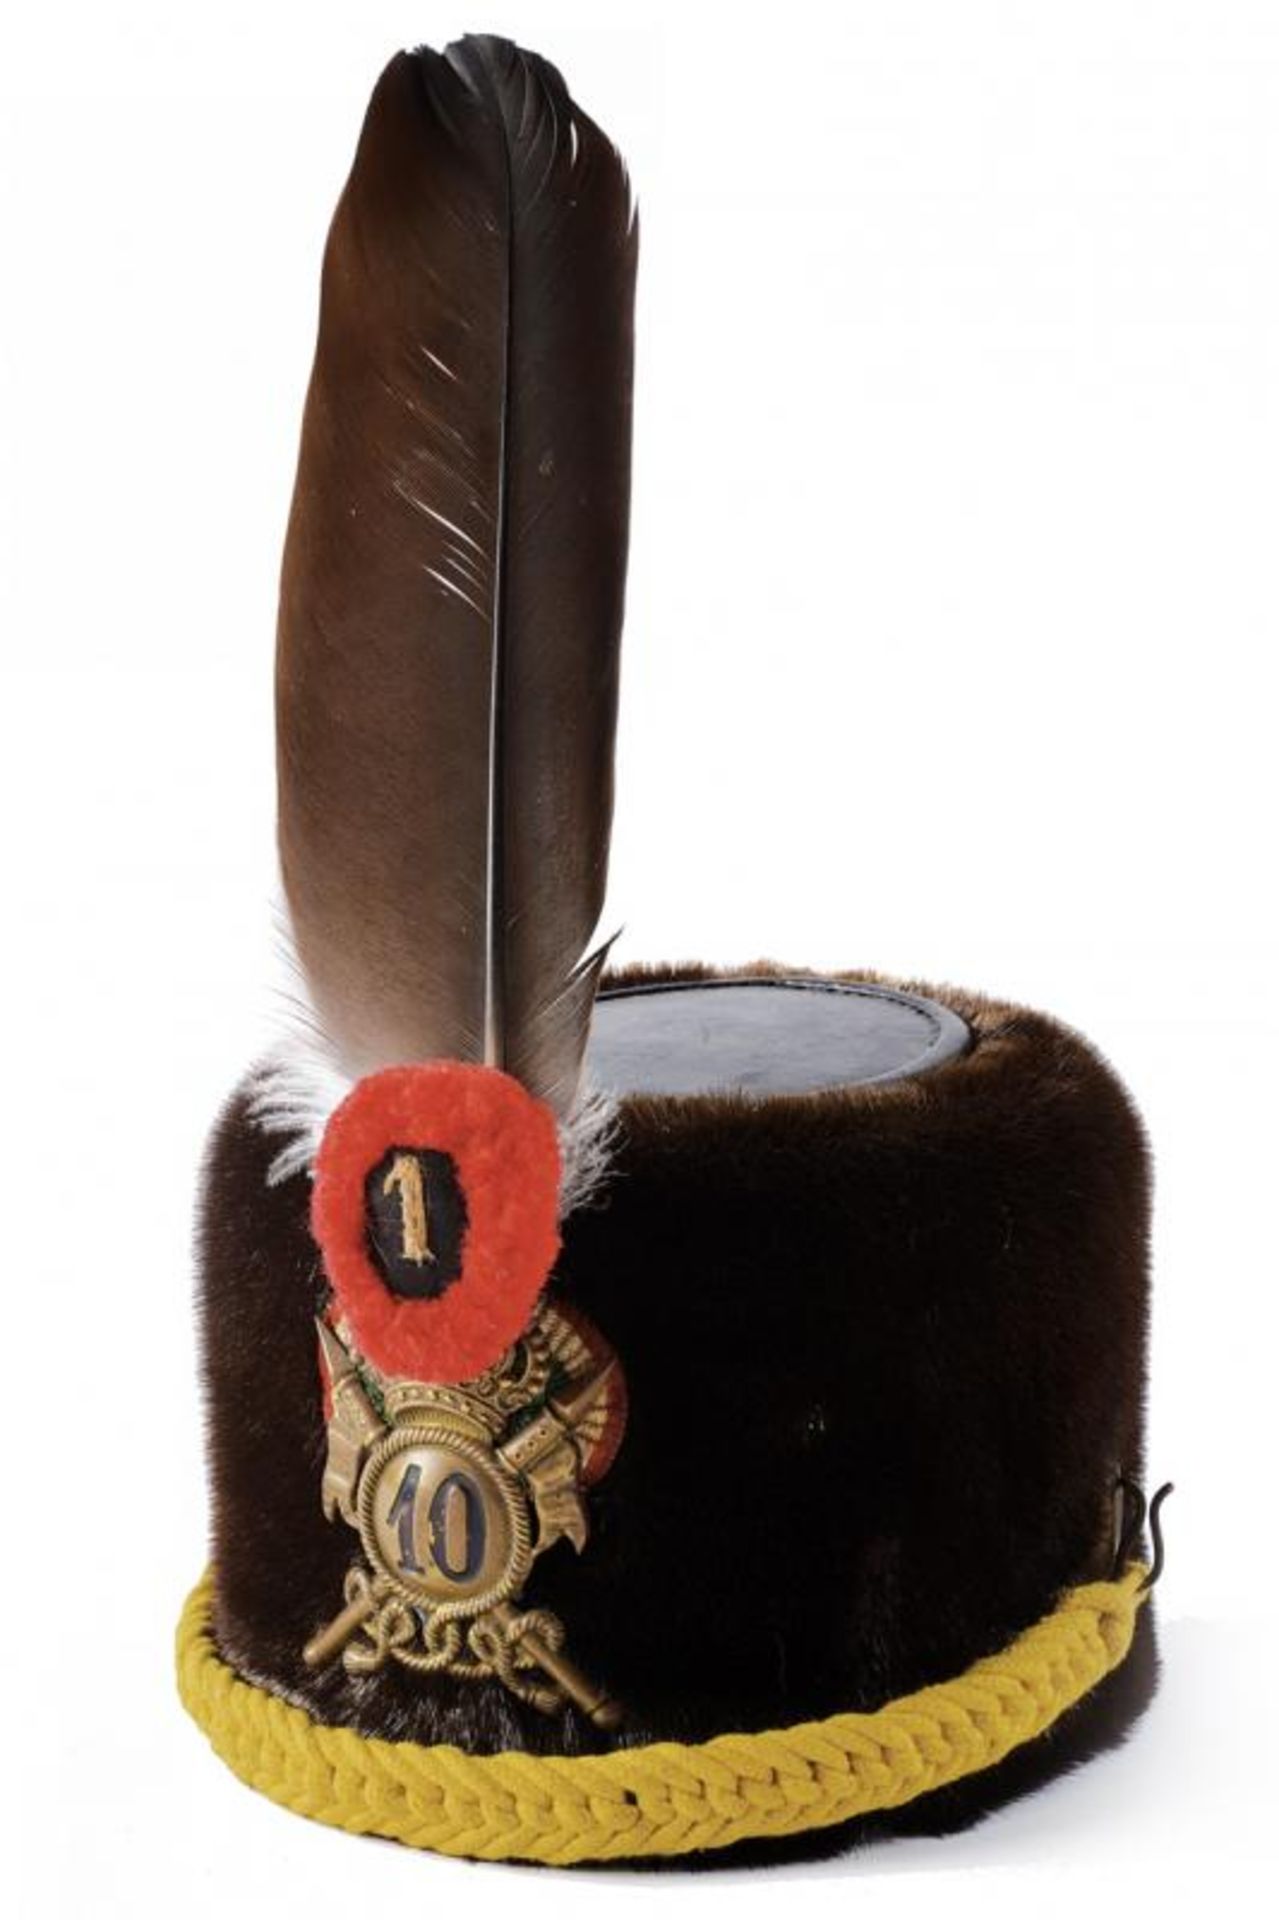 A cavalry NC-officer's bearskin from the 10th lancer's regiment Victor Emmanuel II